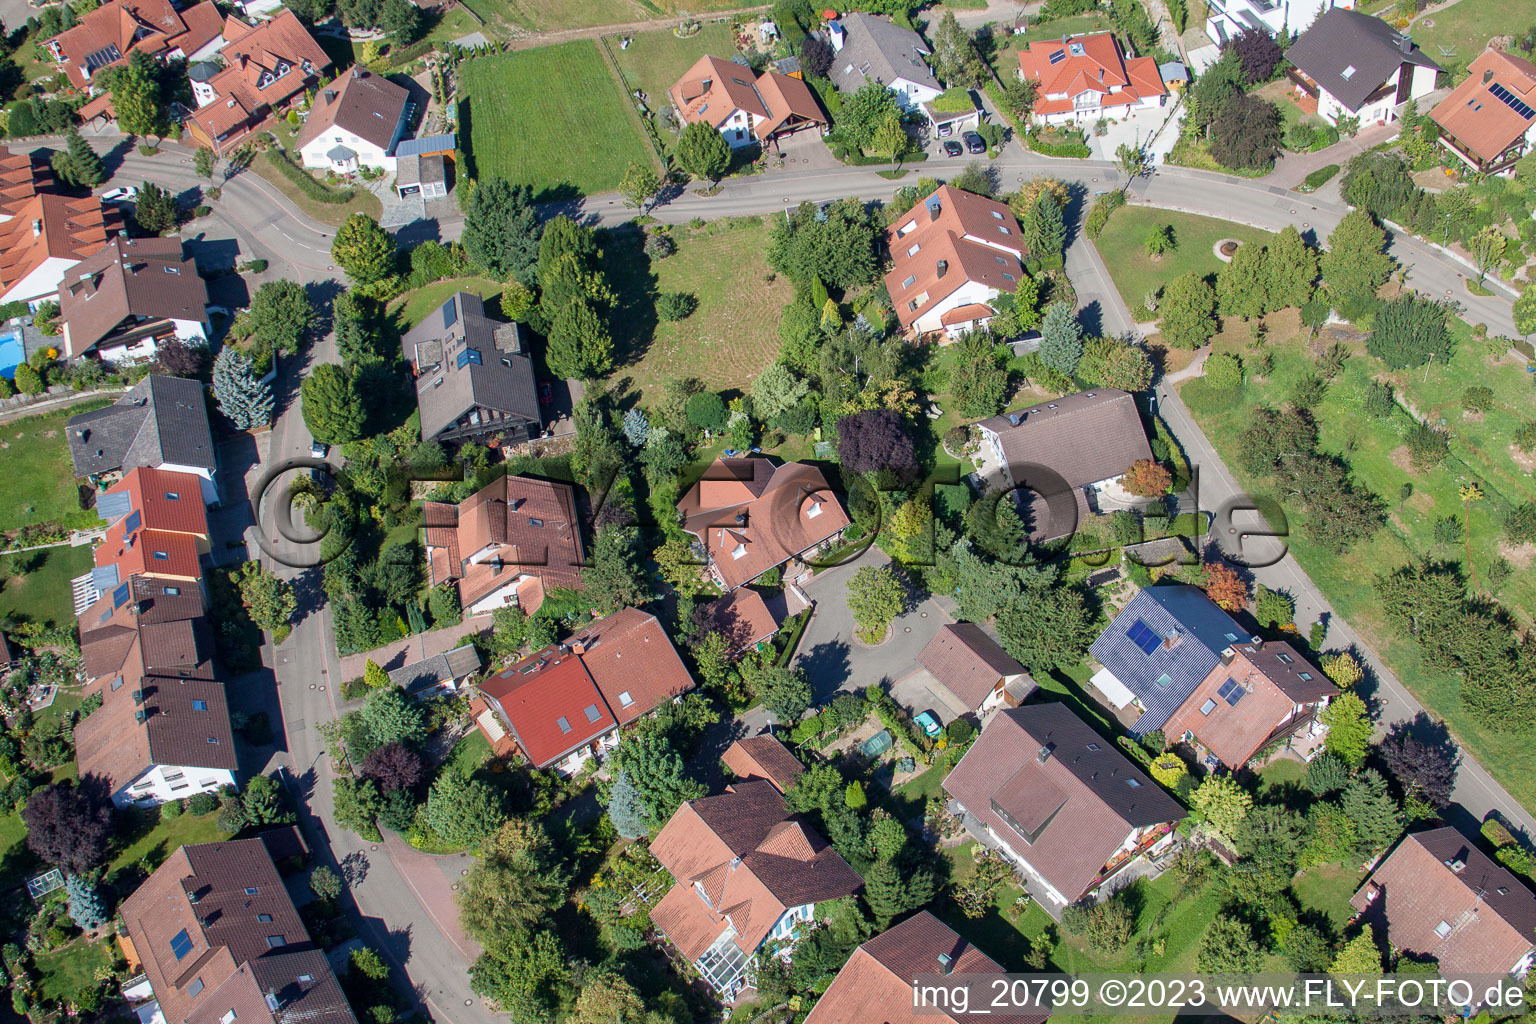 District Fessenbach in Offenburg in the state Baden-Wuerttemberg, Germany seen from a drone